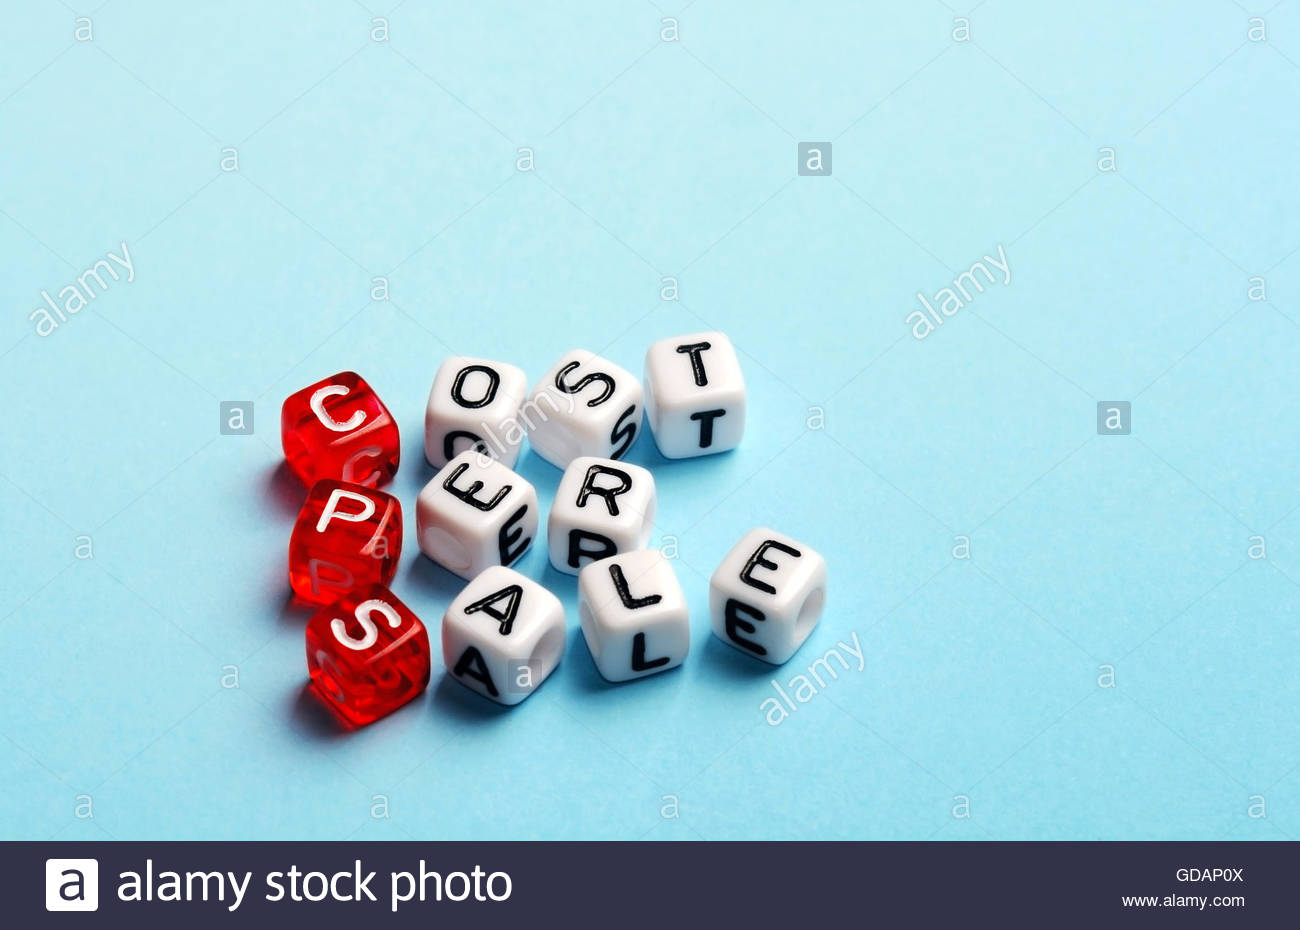 Cps Cost Per Sale Written On Dices Blue Background Stock Photo